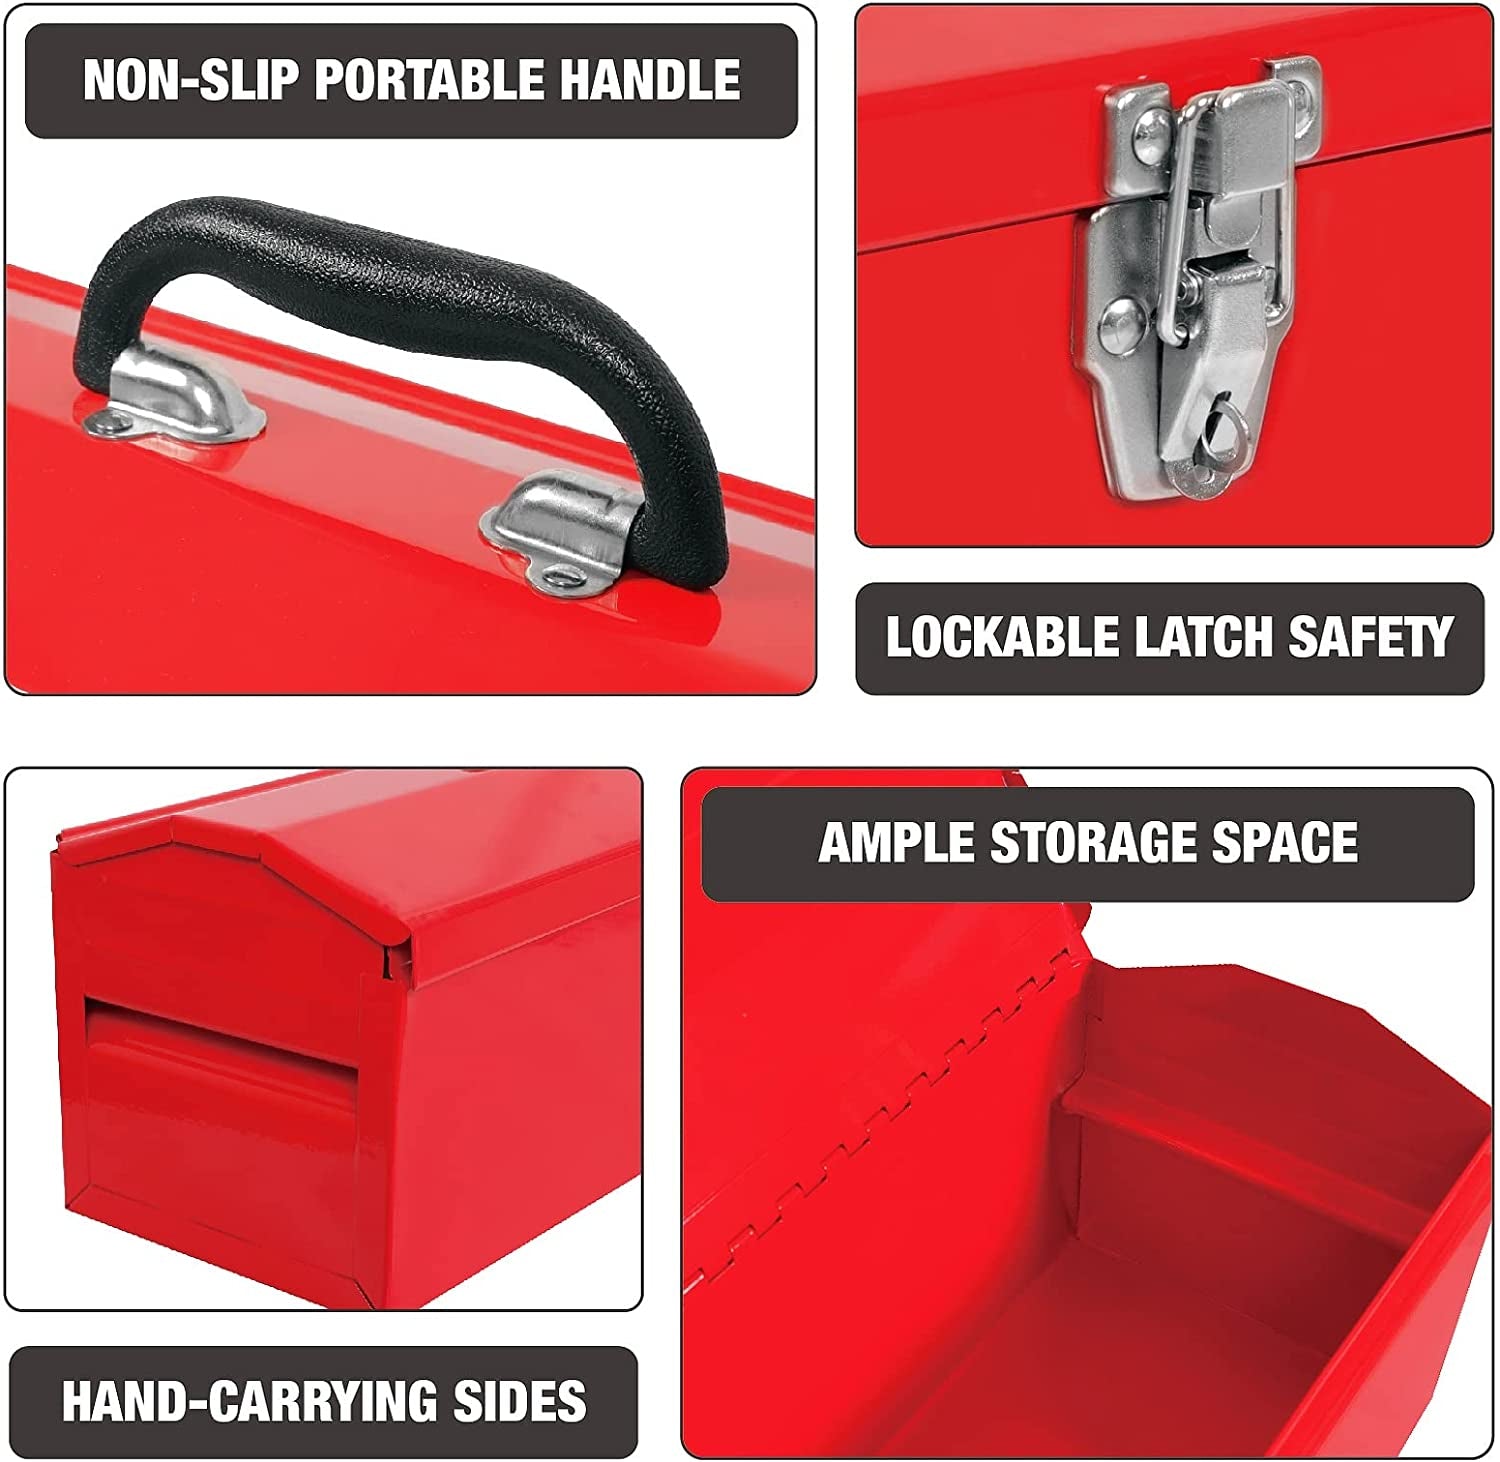 19" Steel Portable Tool Box Organizer with Metal Latch Closure and Removable Storage Tray, Red